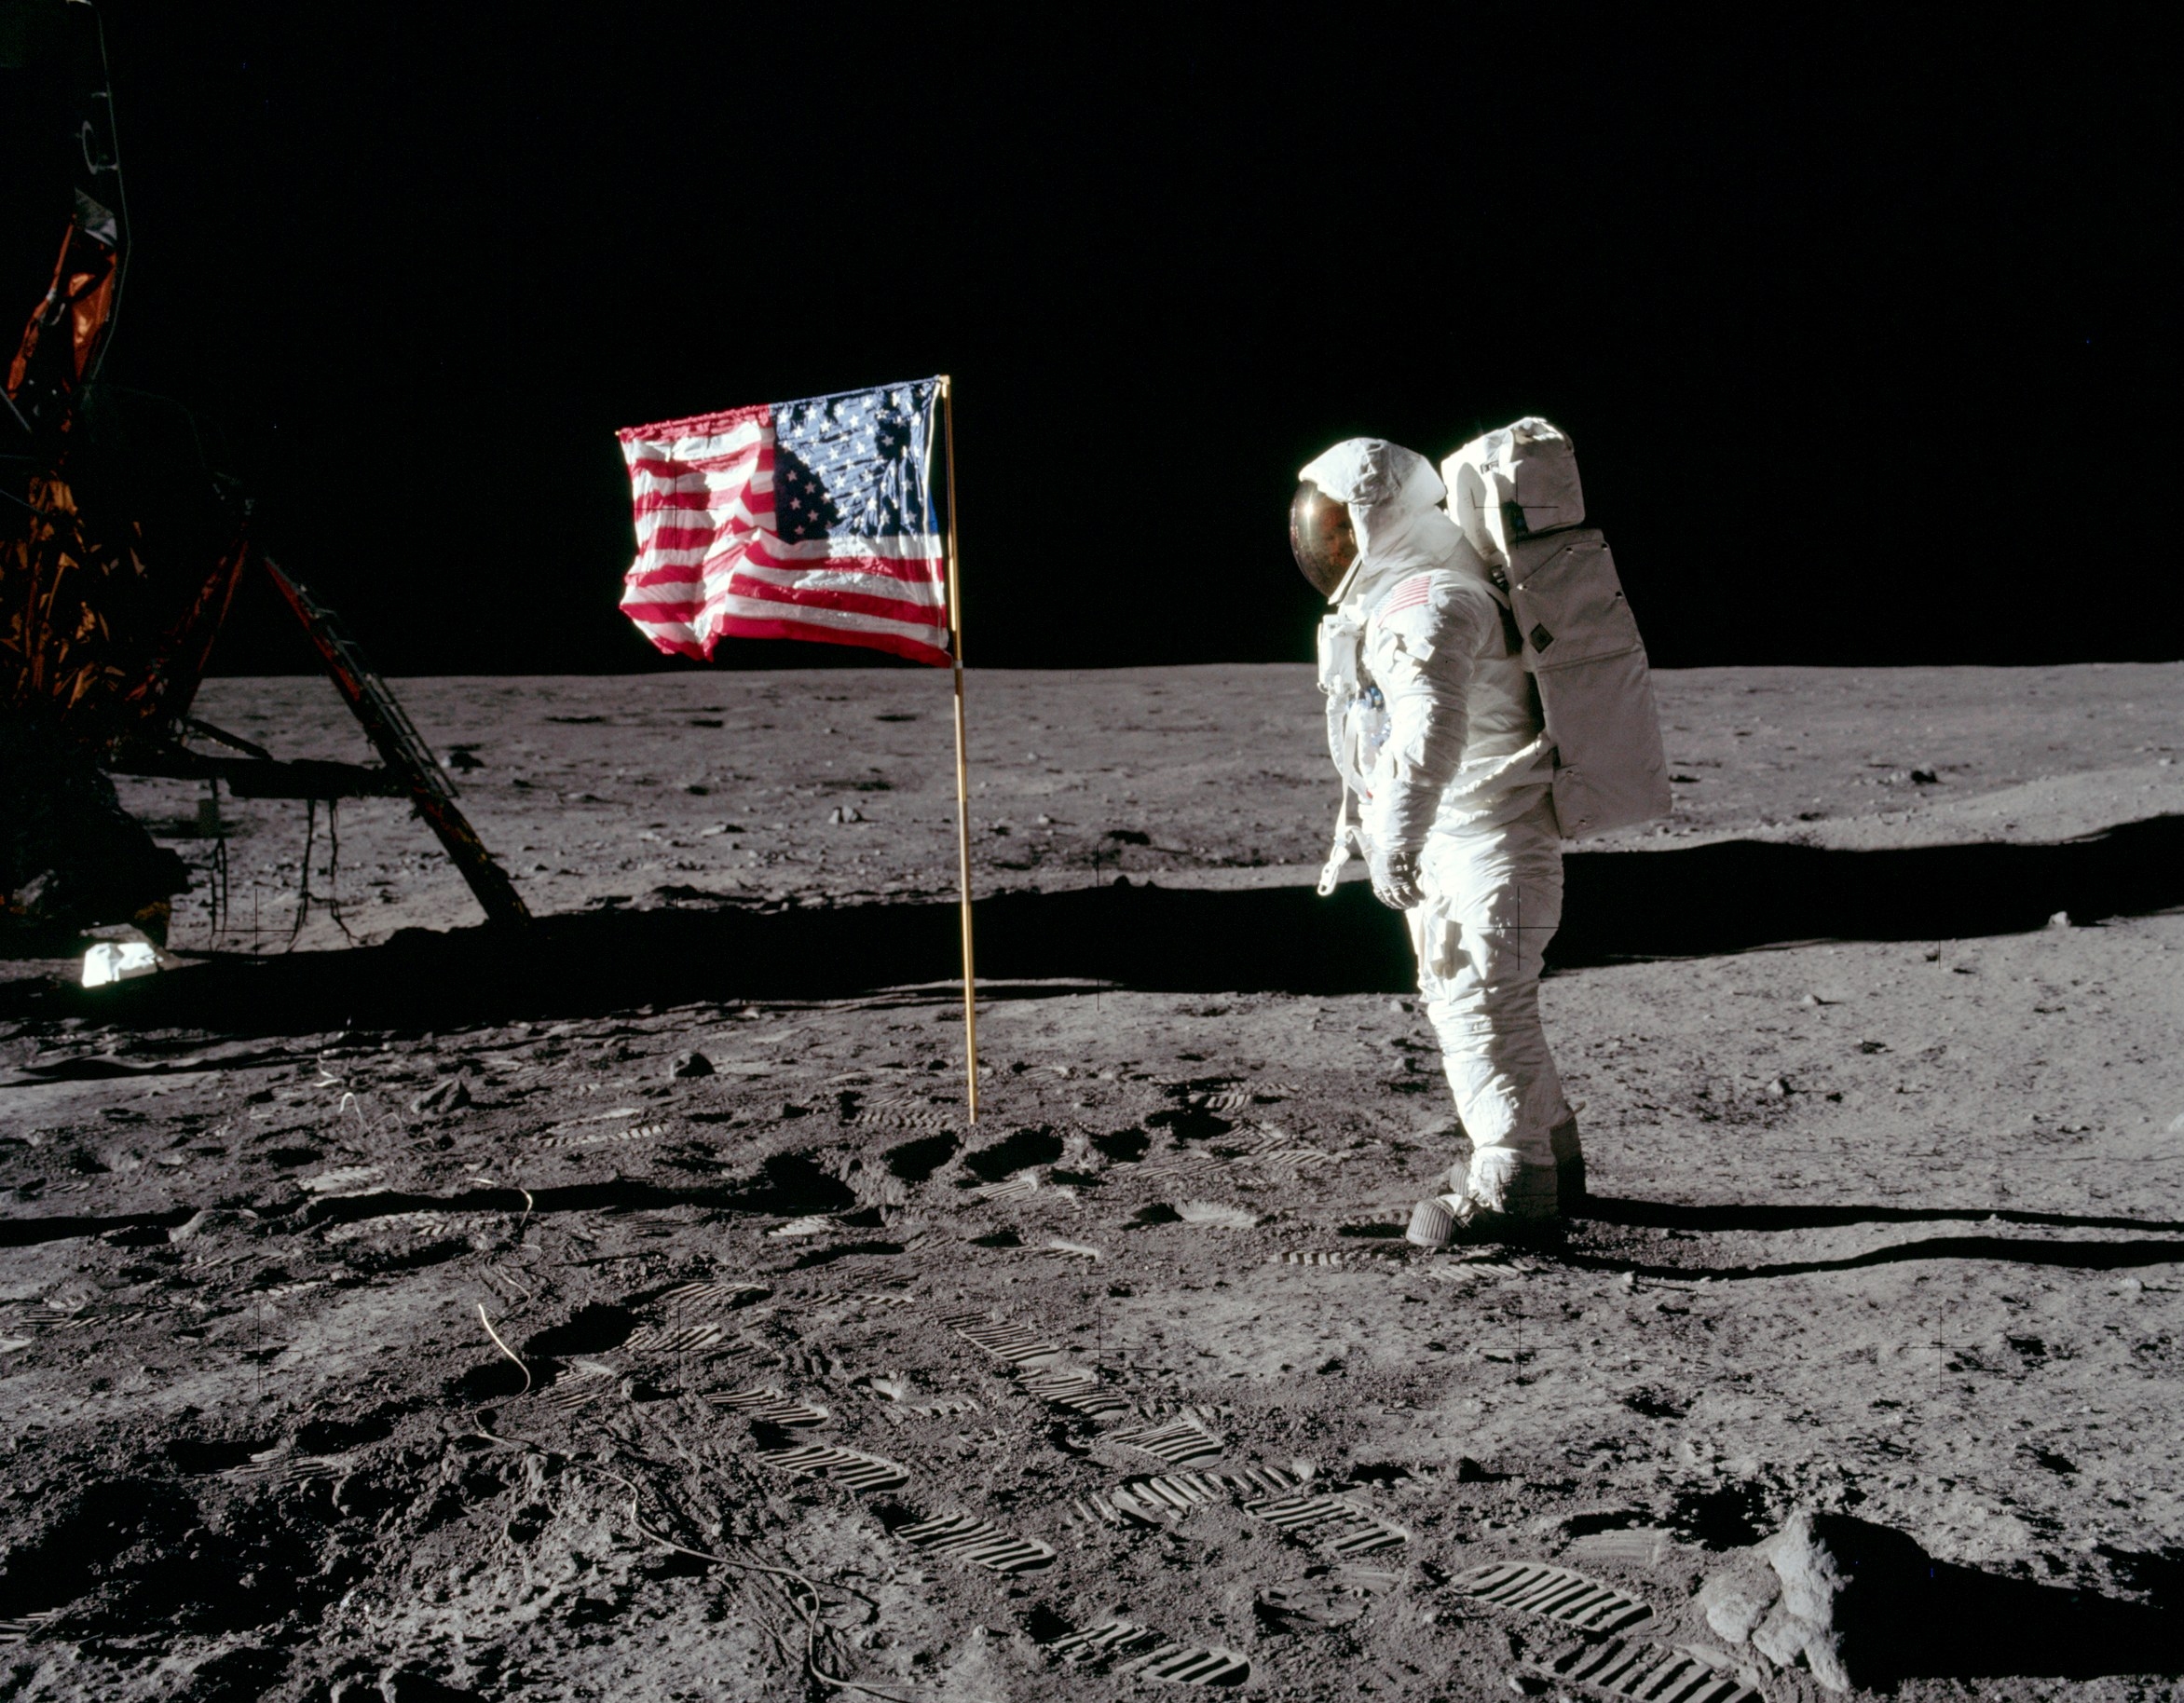 Astronaut Buzz Aldrin stands on the Moon facing a U.S. flag